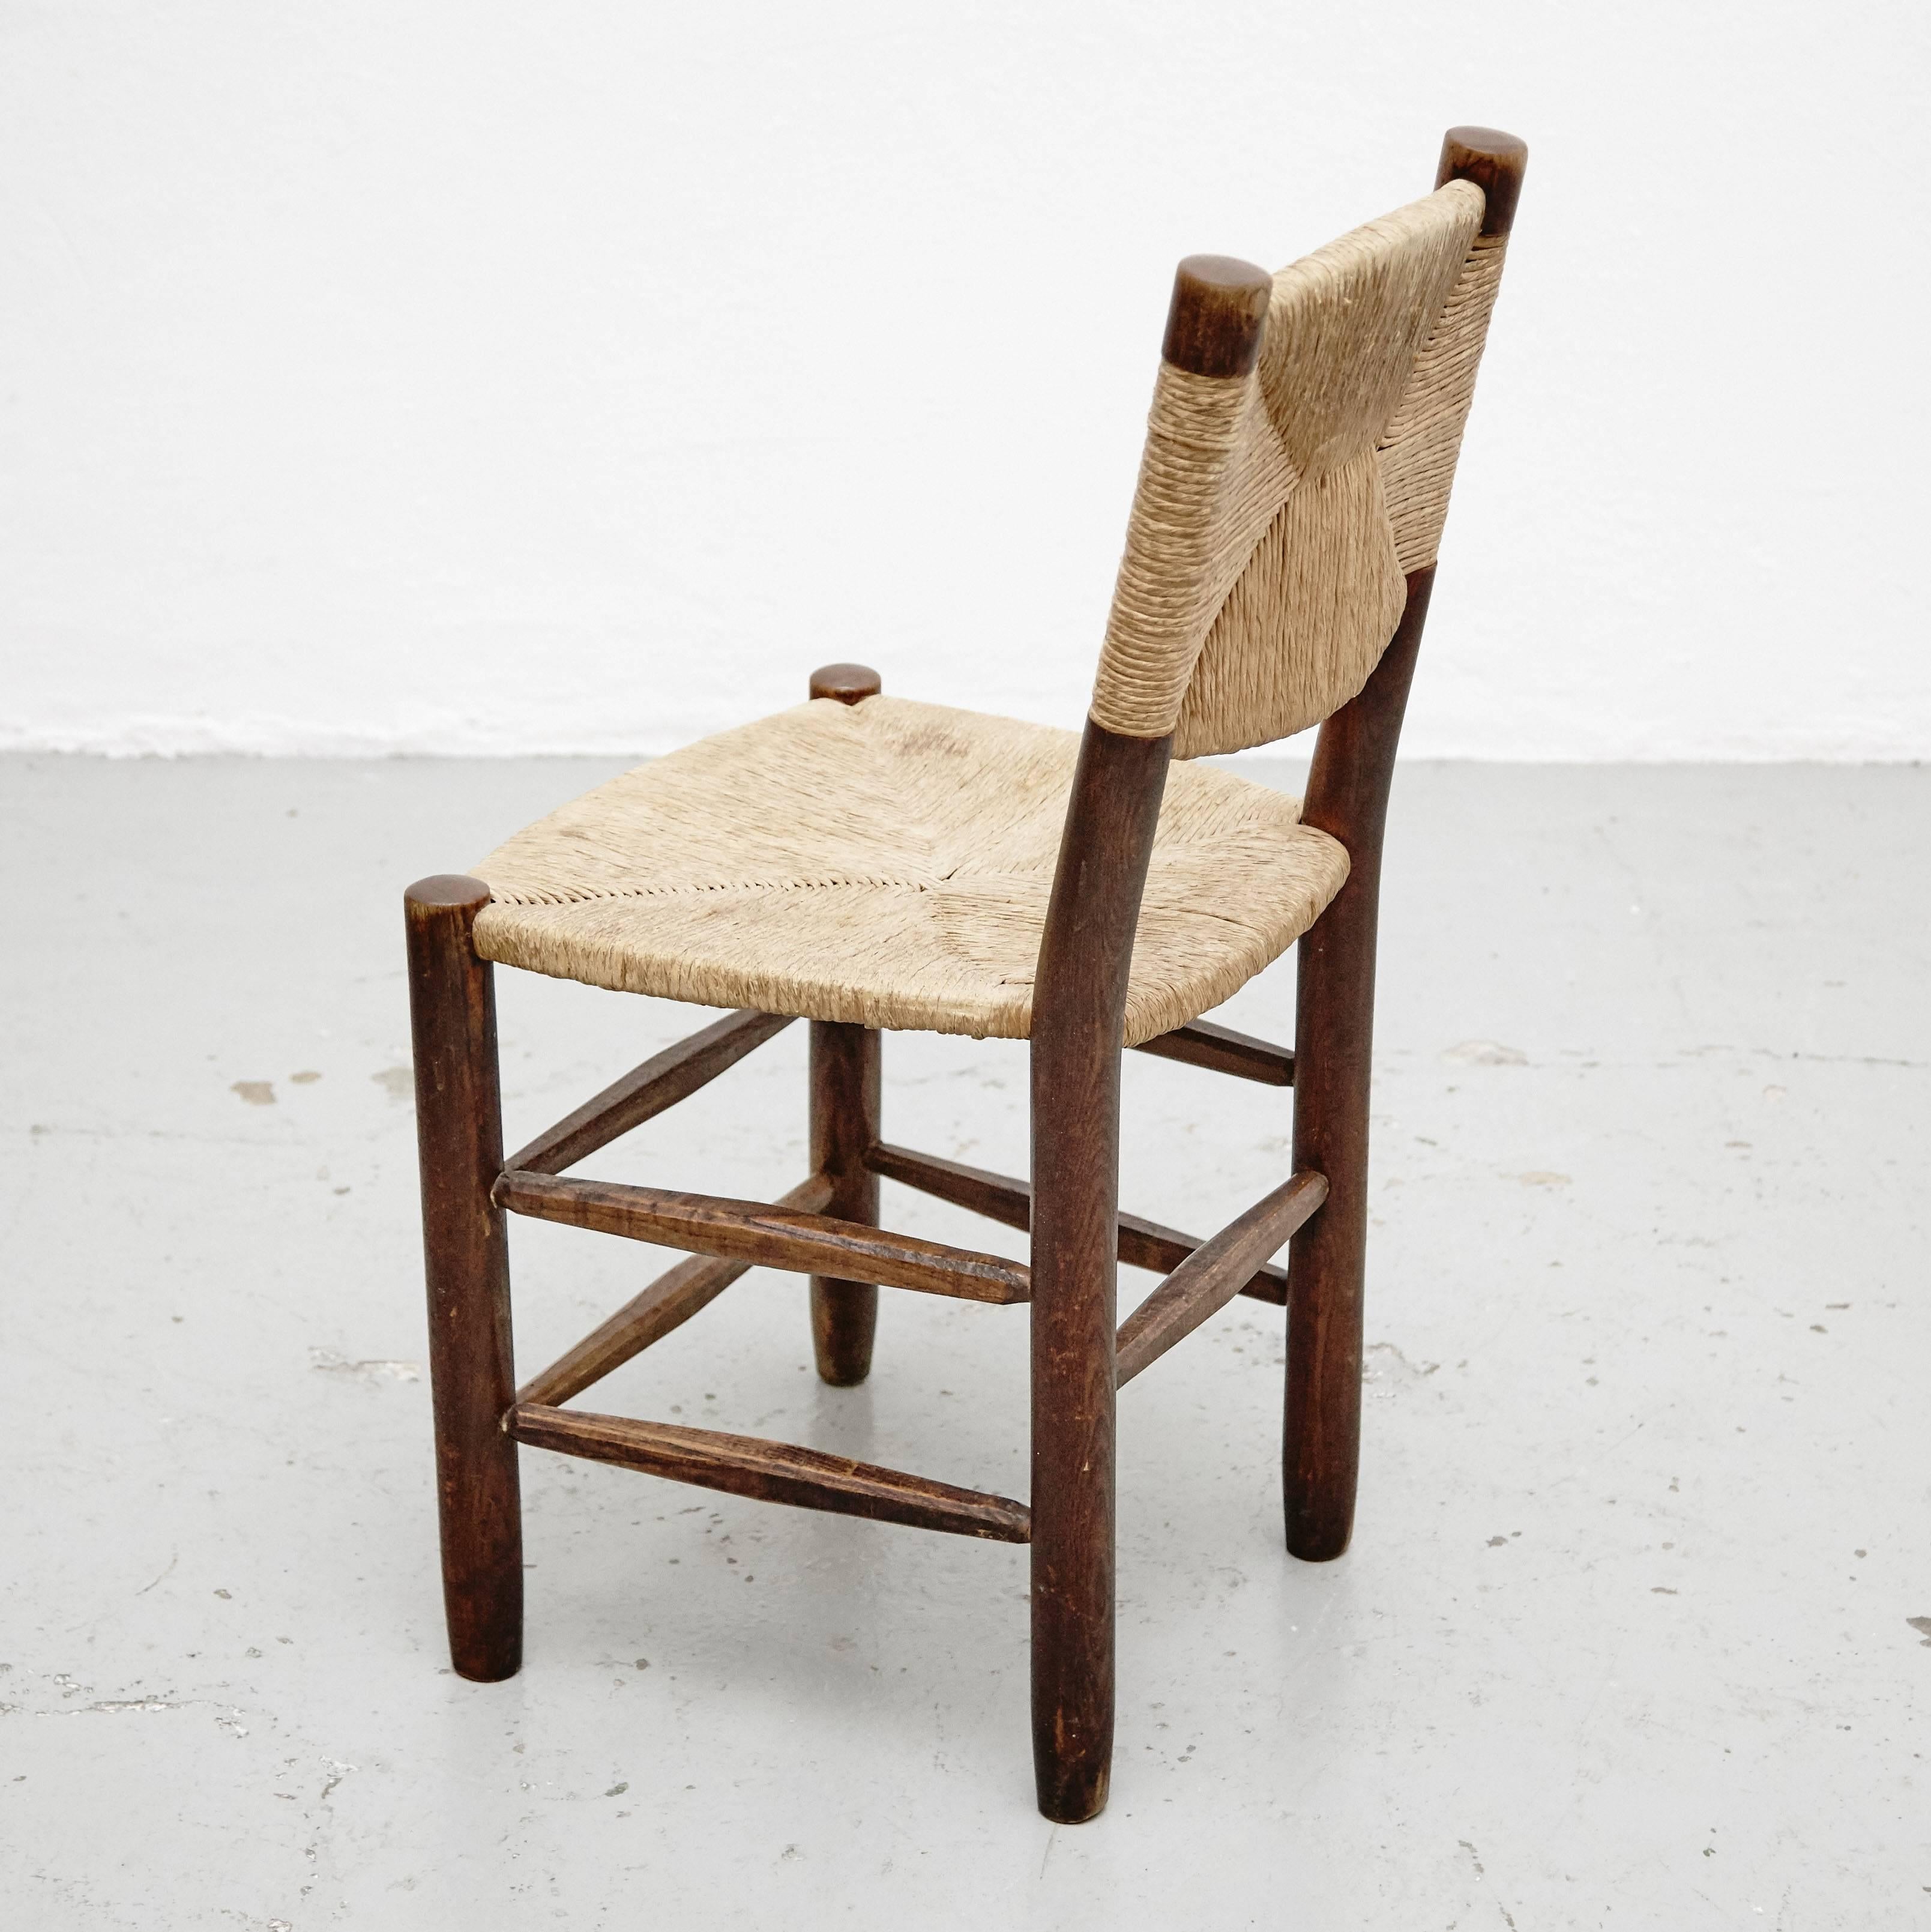 French Charlotte Perriand Set of Four Chairs, circa 1950